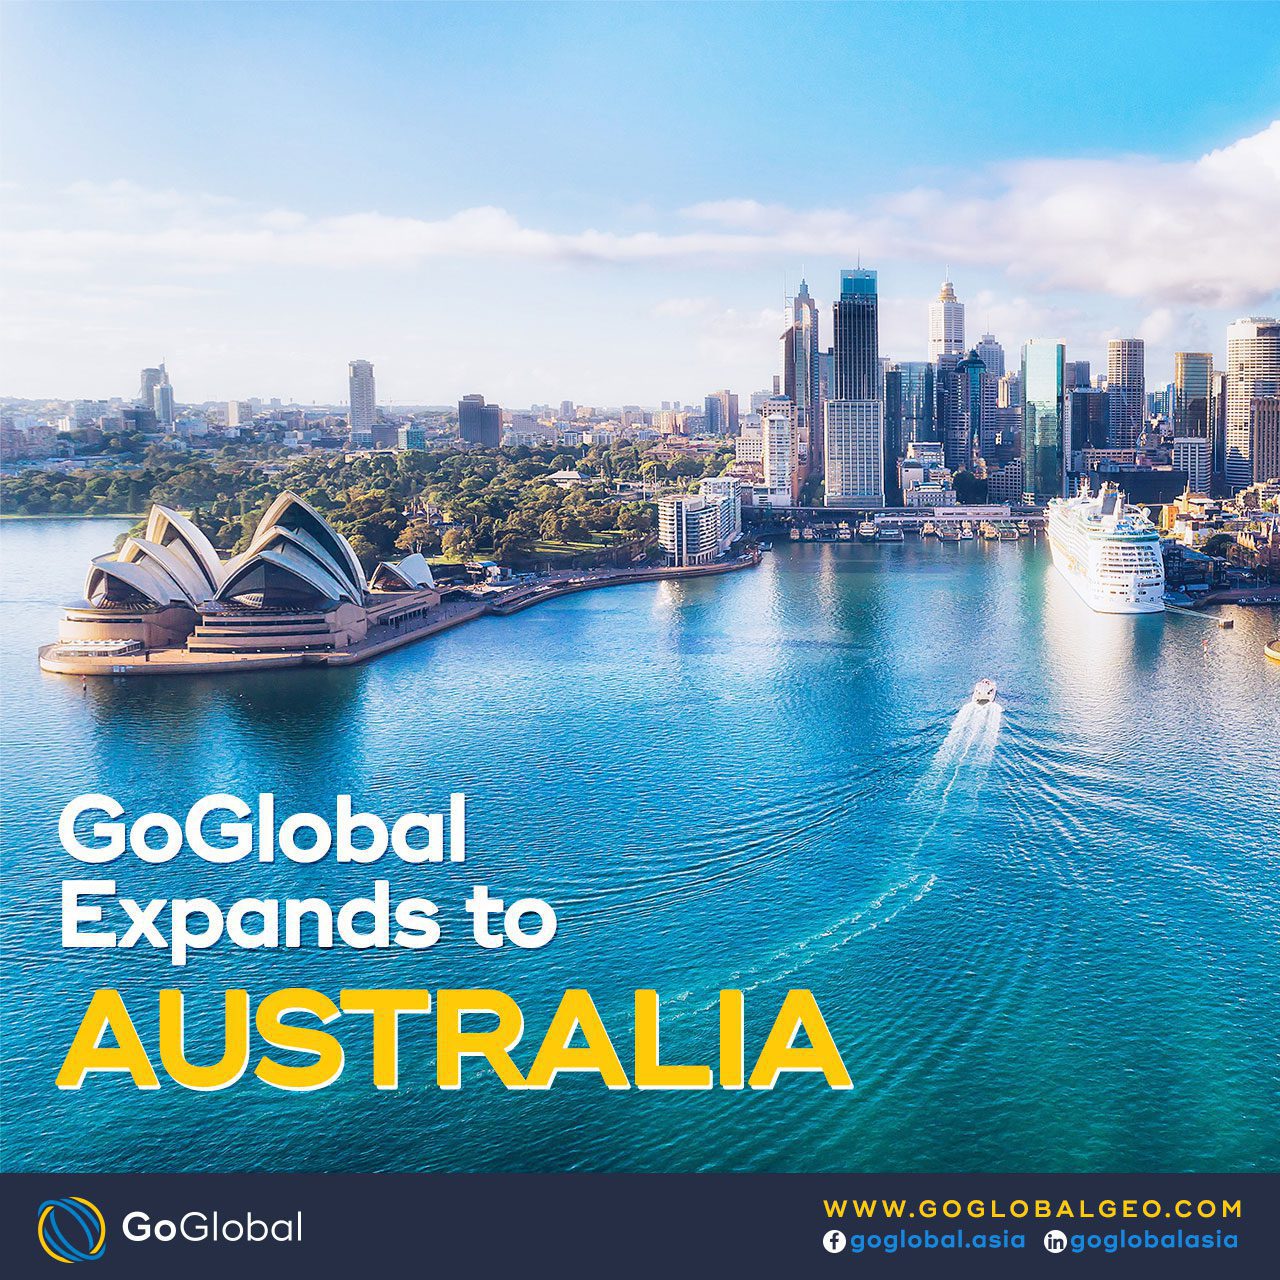 Press Release: GoGlobal Expands to Australia